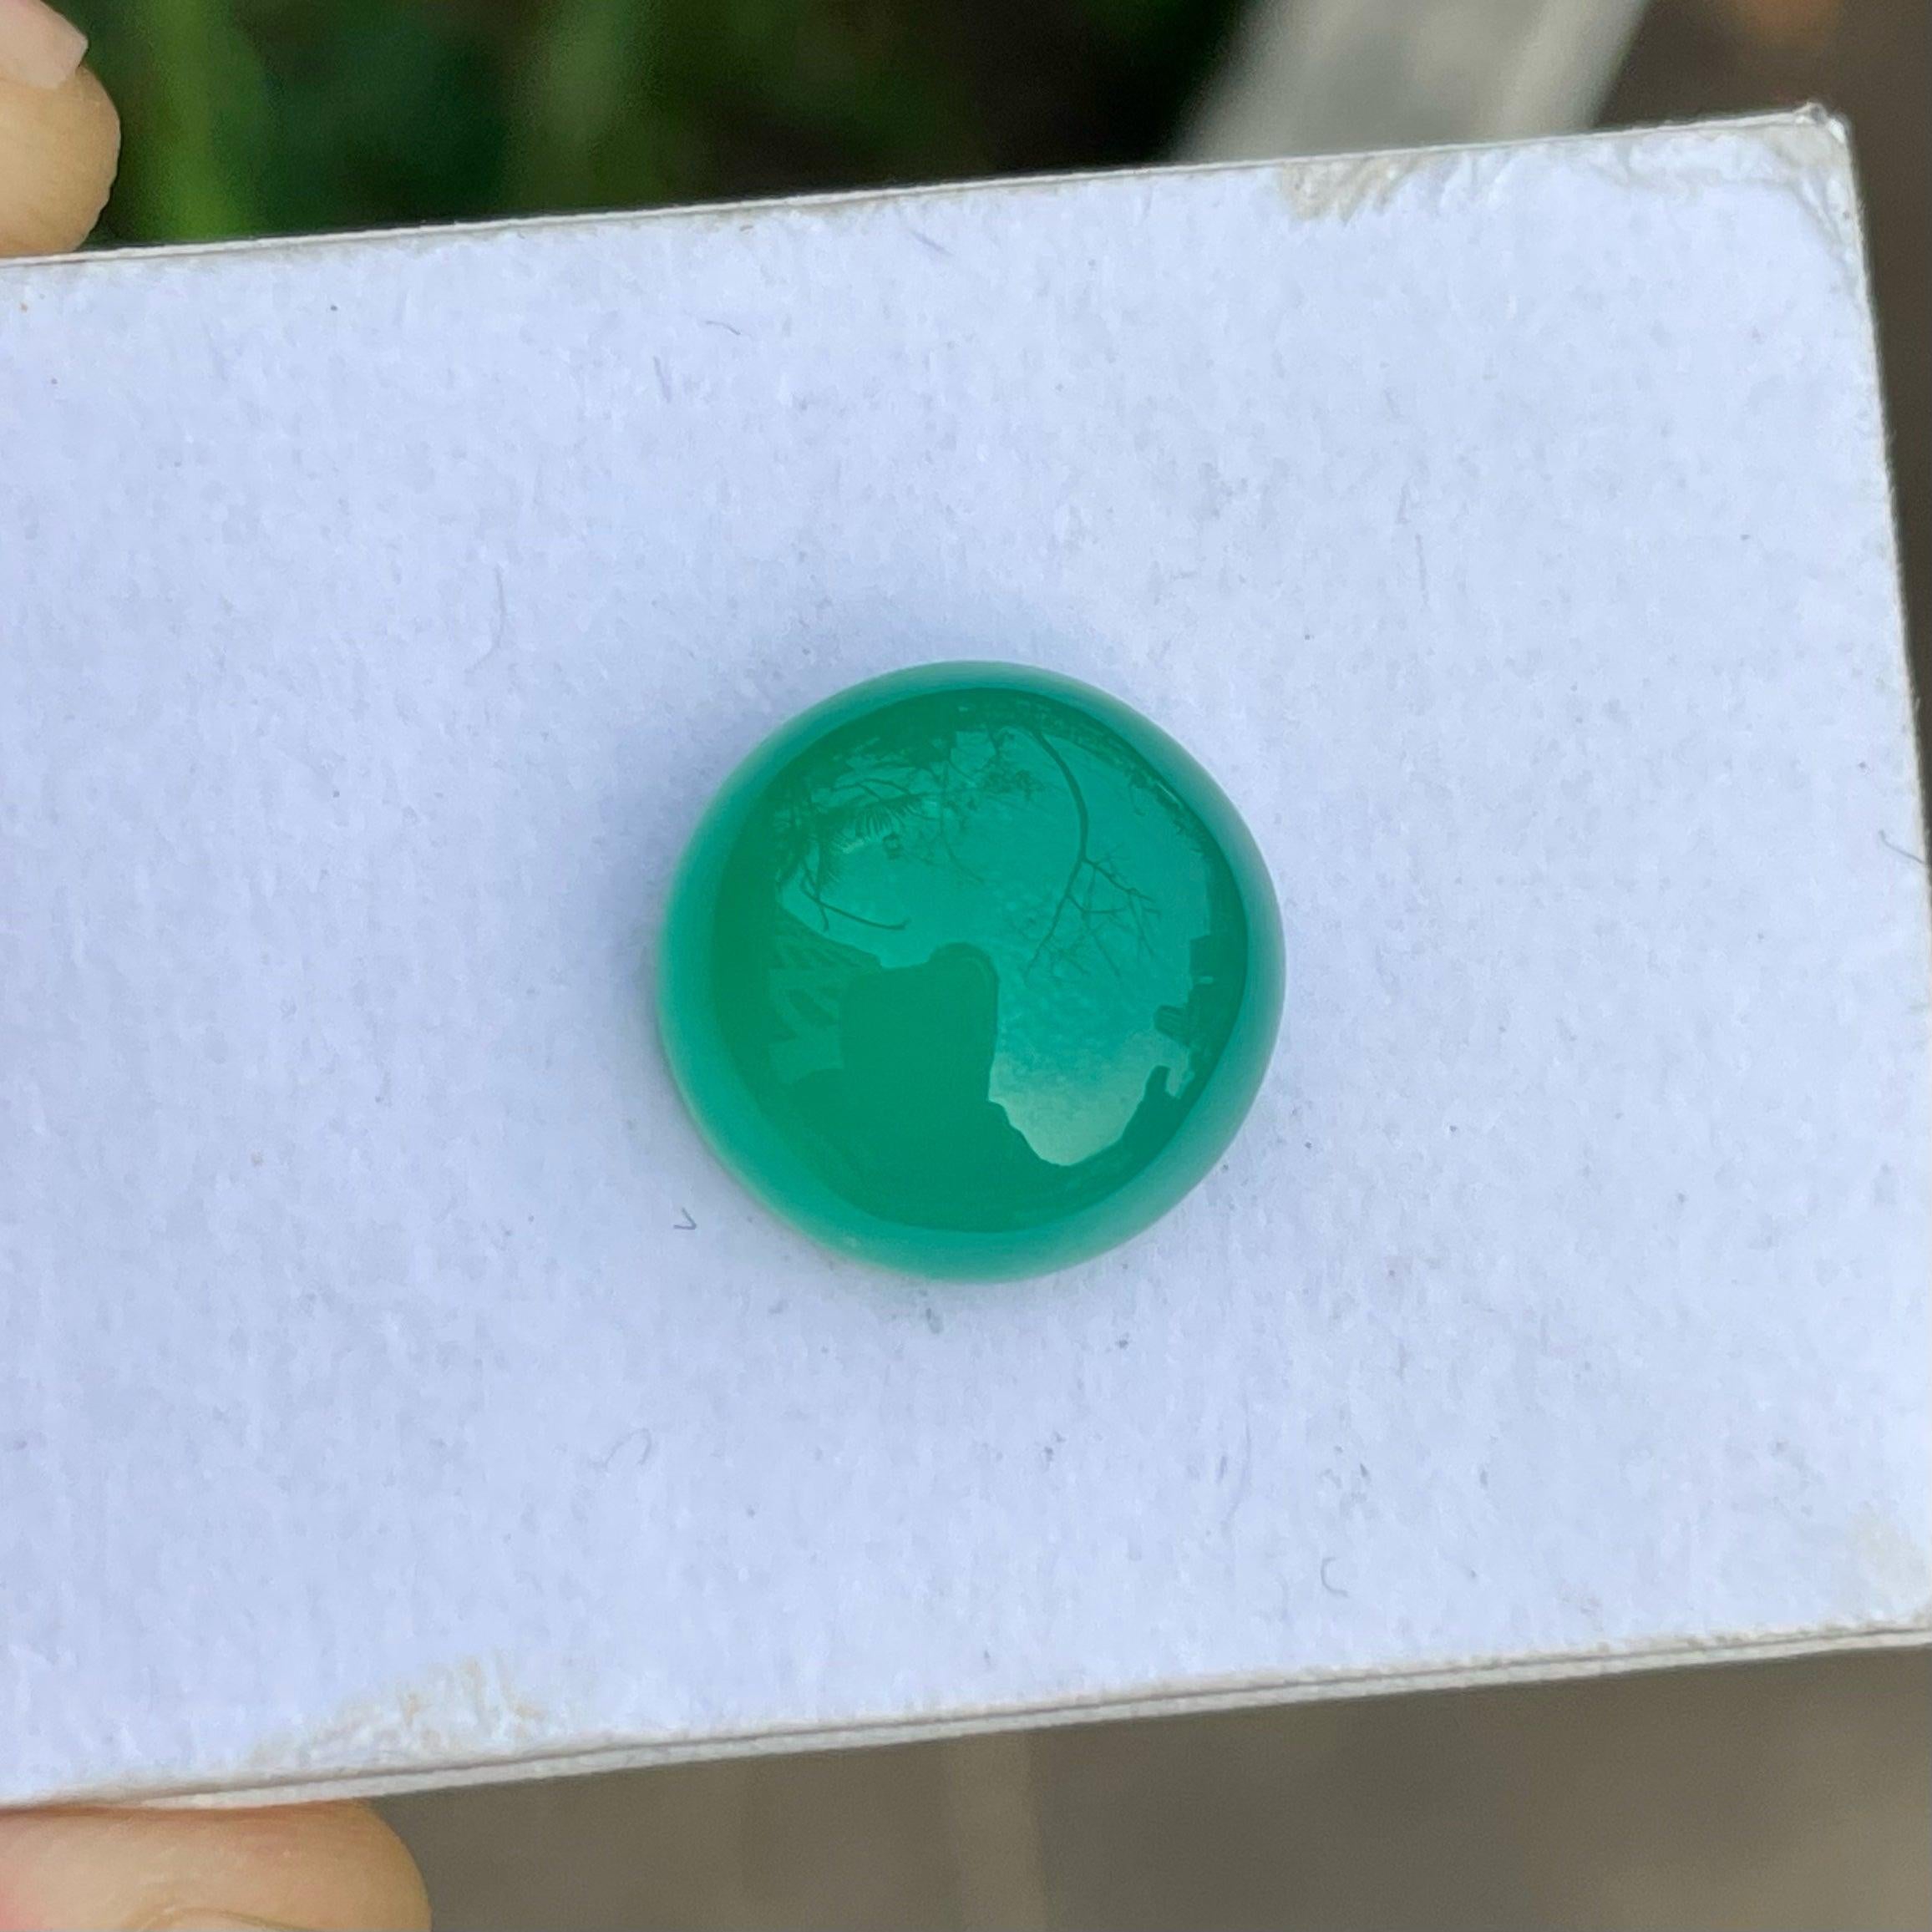 Marvelous Natural Green Agate Gemstone, available for sale at wholesale price, natural high-quality 7.15 carats flawless Transparency Translucent, certified Agate from India.

Product Information:
GEMSTONE NAME: Marvelous Natural Green Agate